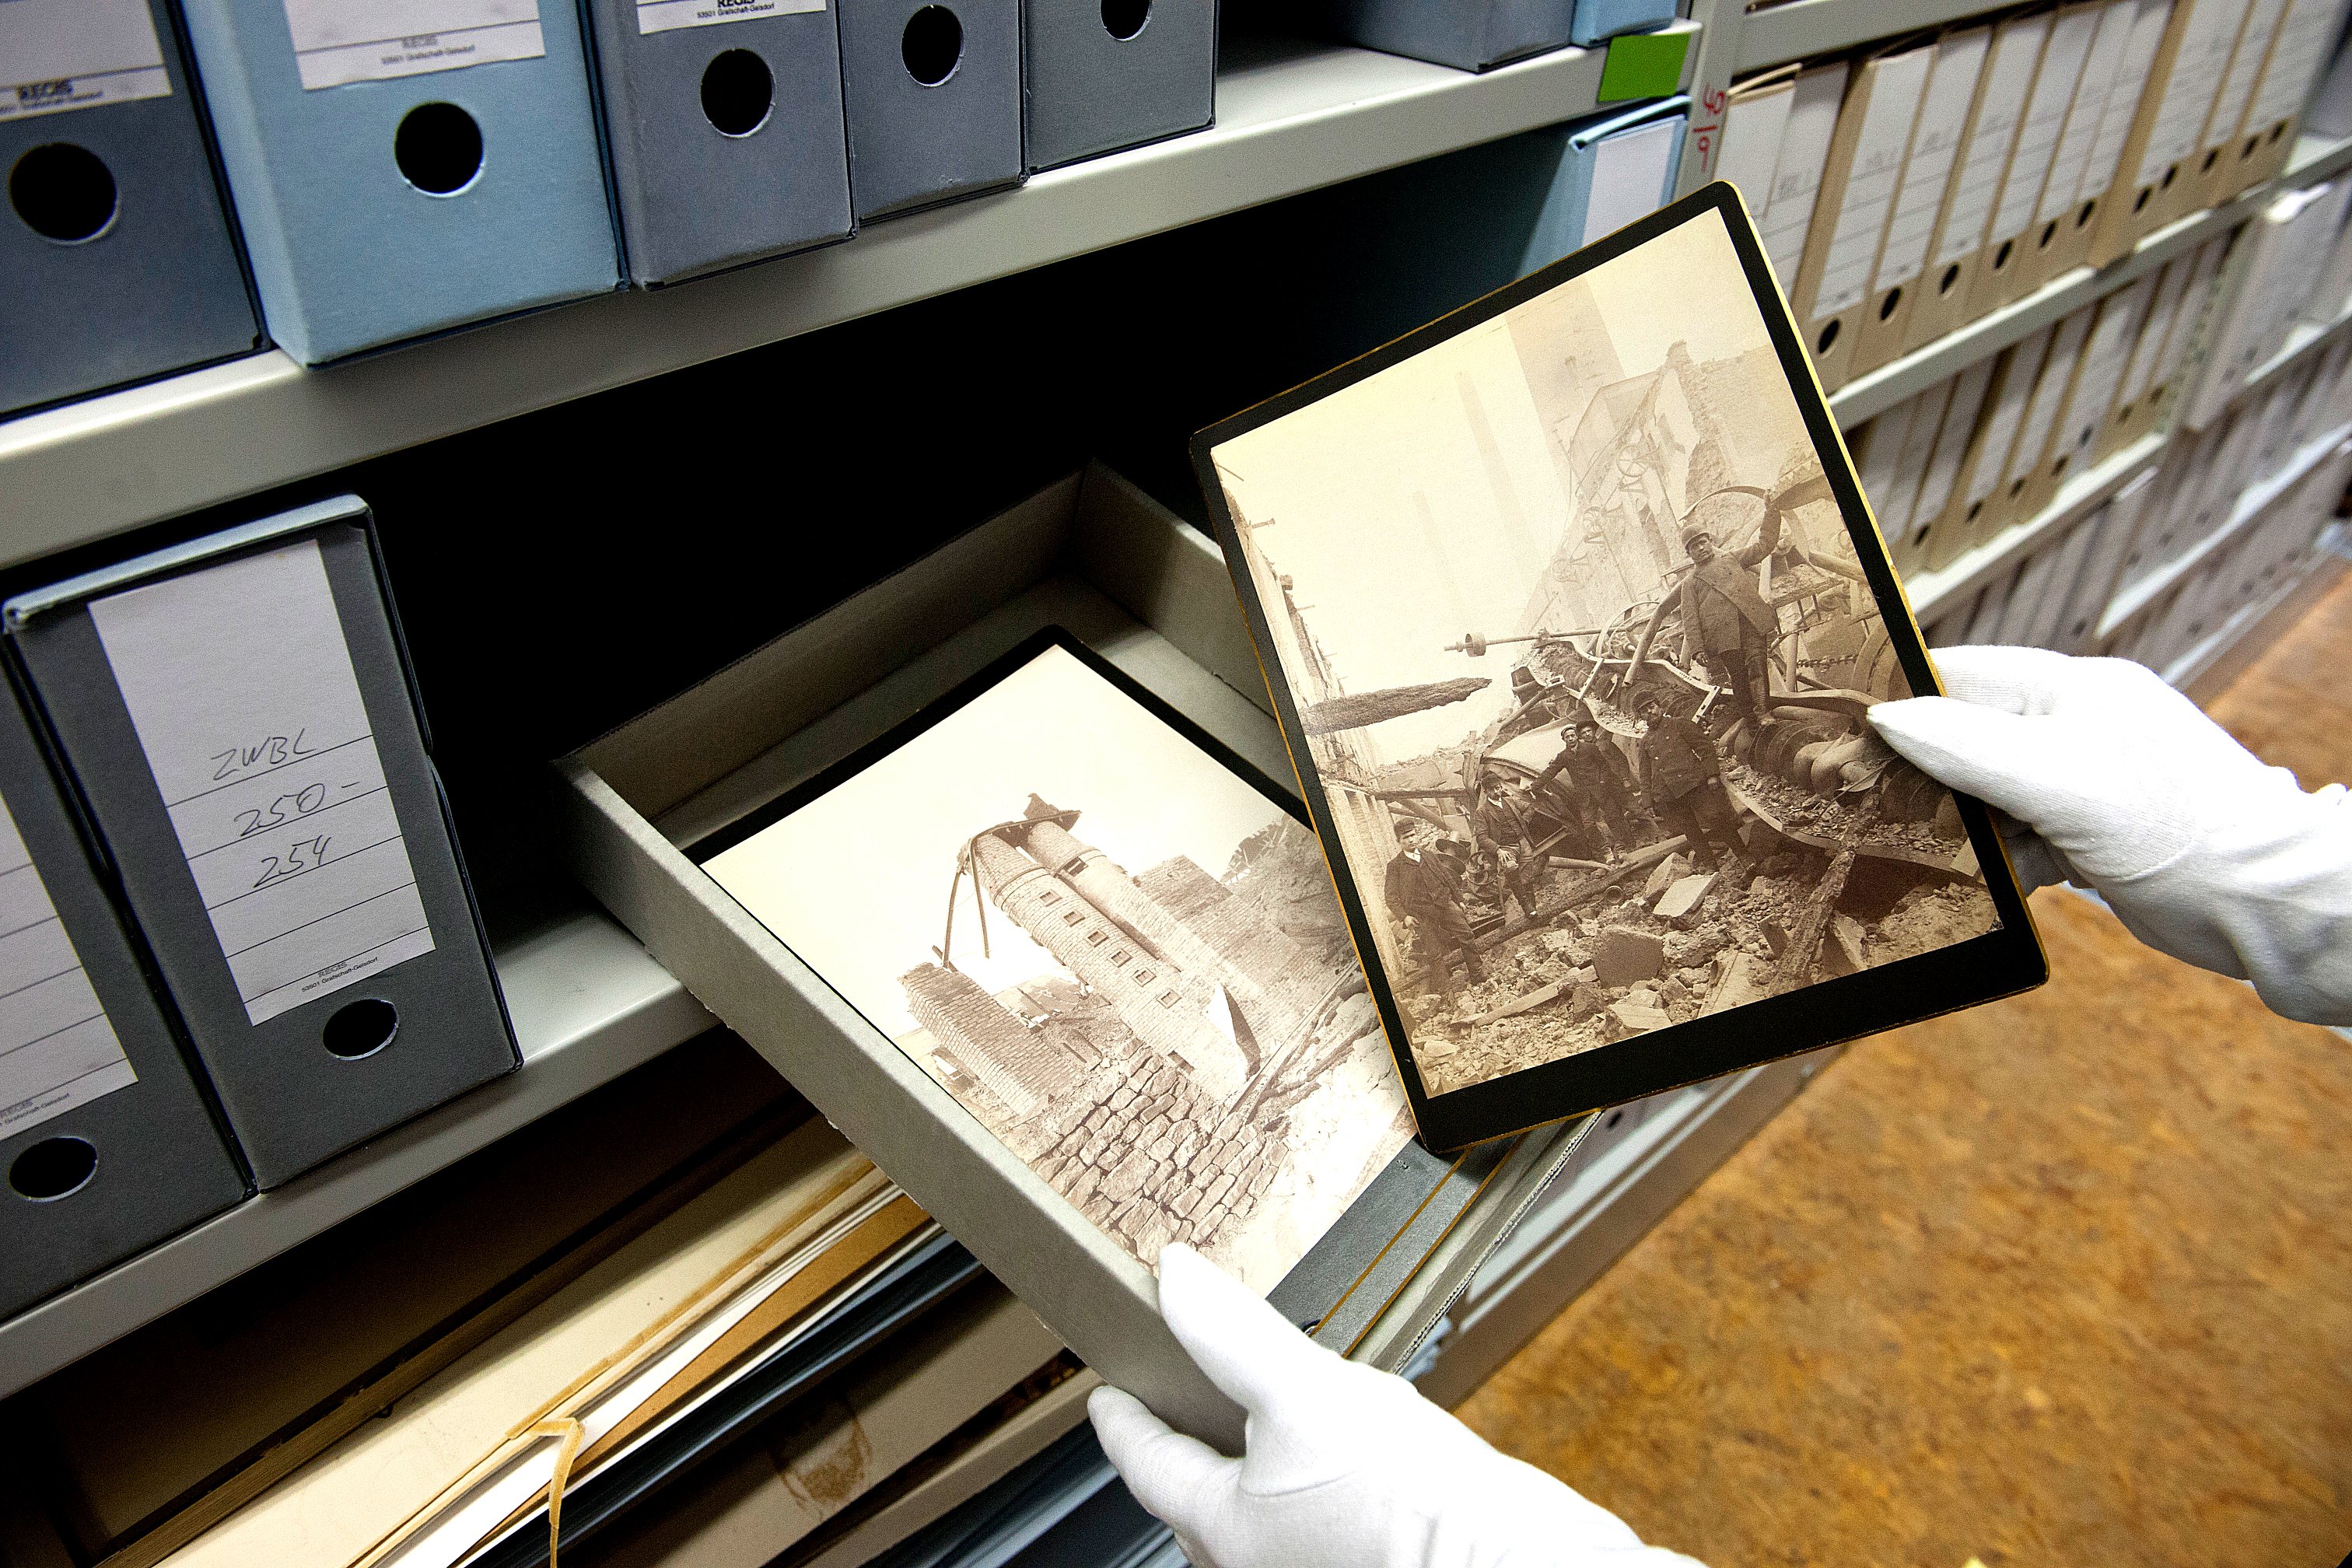 Gloved hands take historical footage out of a slipcase